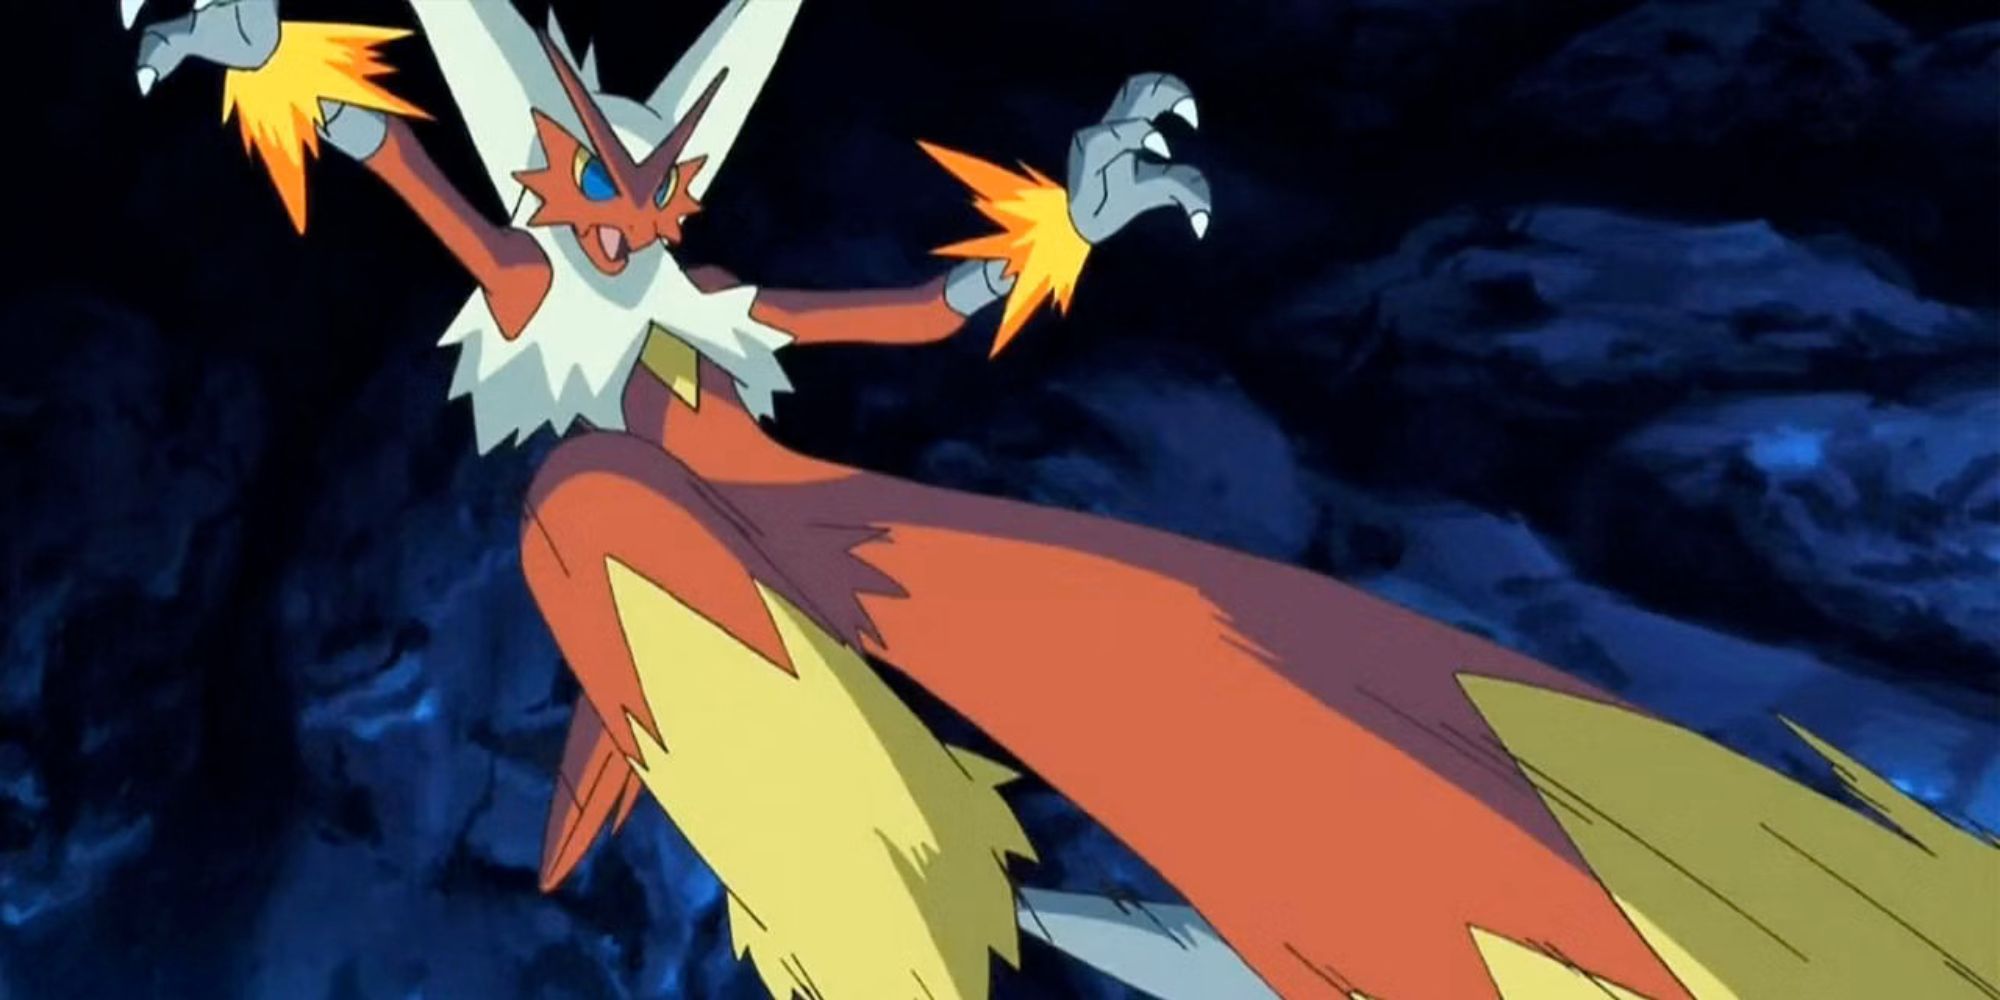 Blaziken attacks from the air in a cave